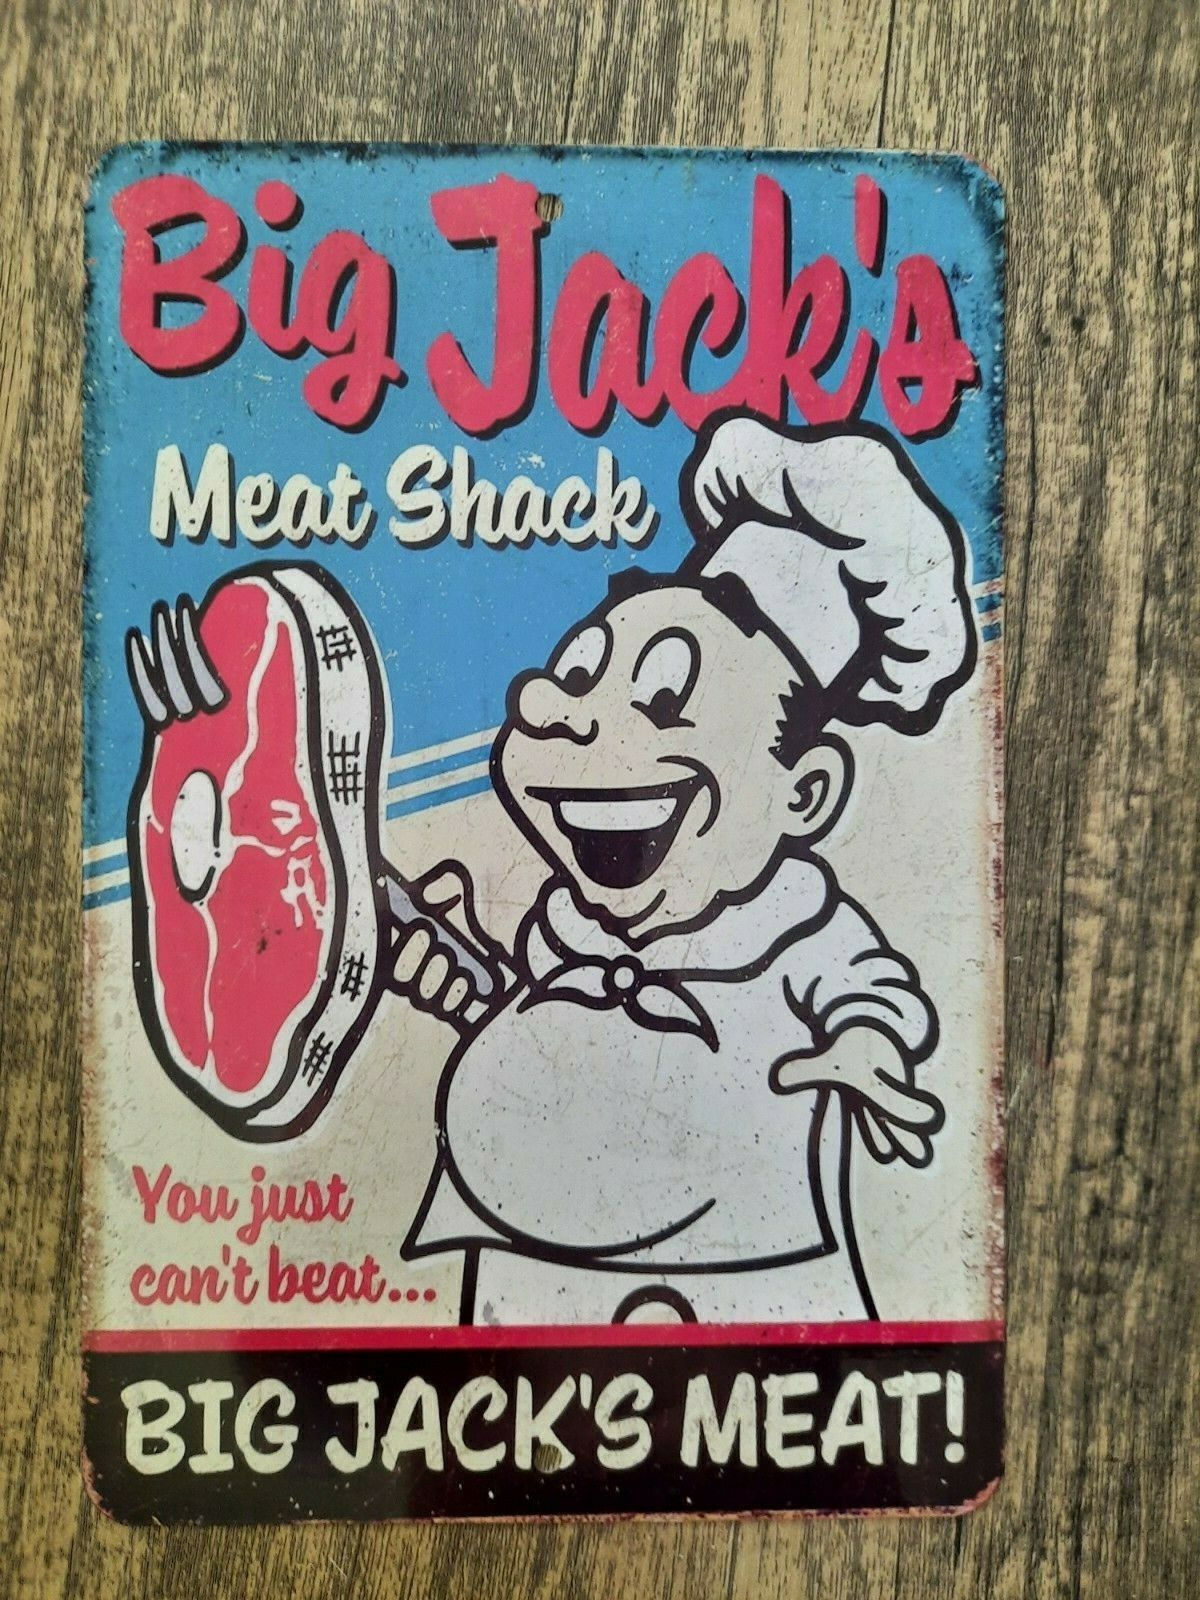 Big Jacks Meat Shack You Just Cant Beat 8x12 Metal Wall Sign Funny Misc Poster